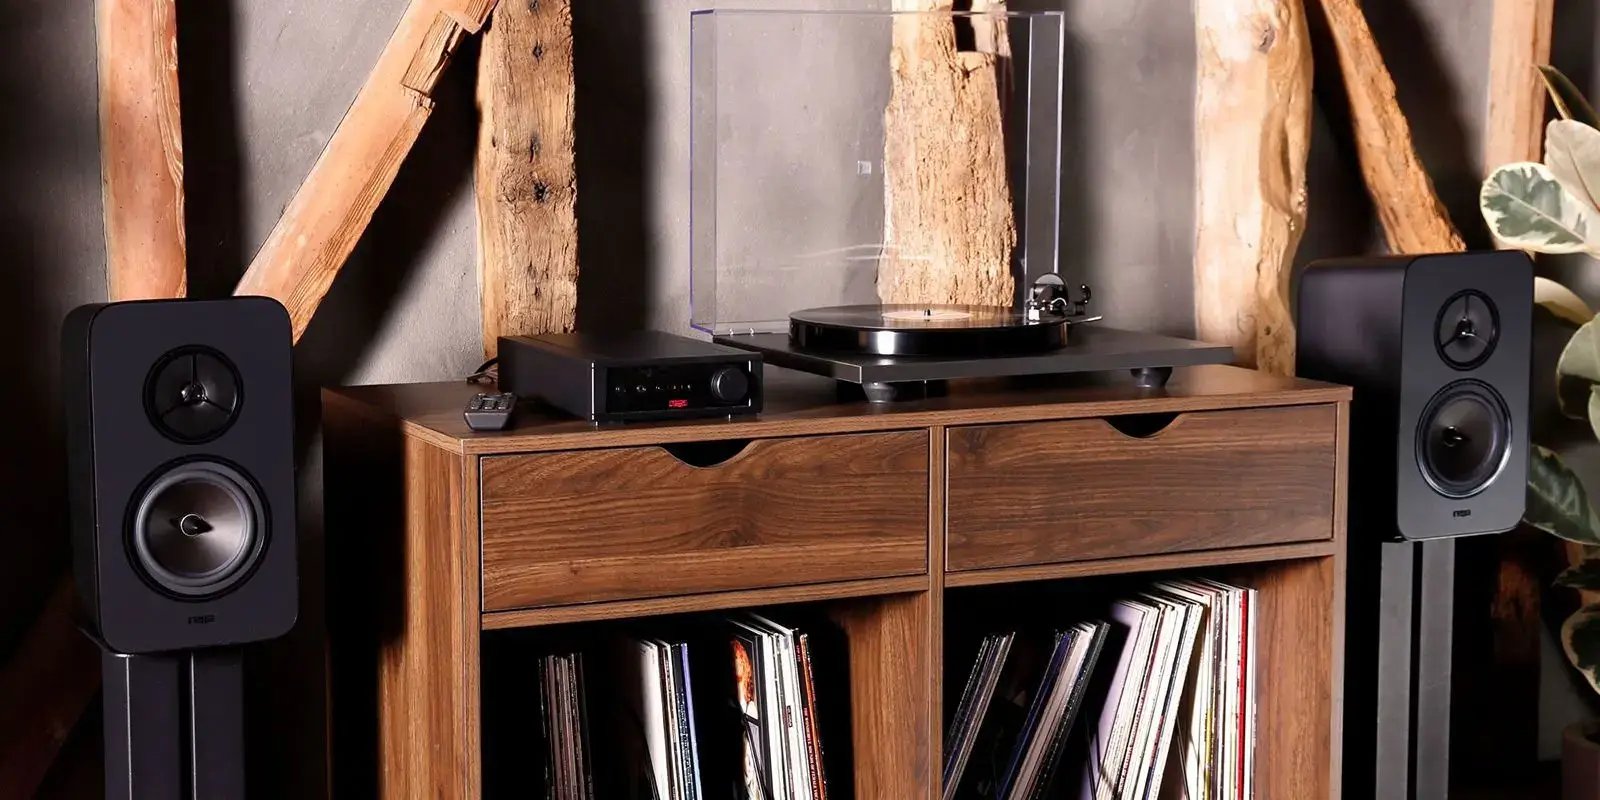 HiFix is a client of LoudLocal. This image shows a sound system and record player on a wooden set of drawers with a collection of records underneath and wooden beams in the background